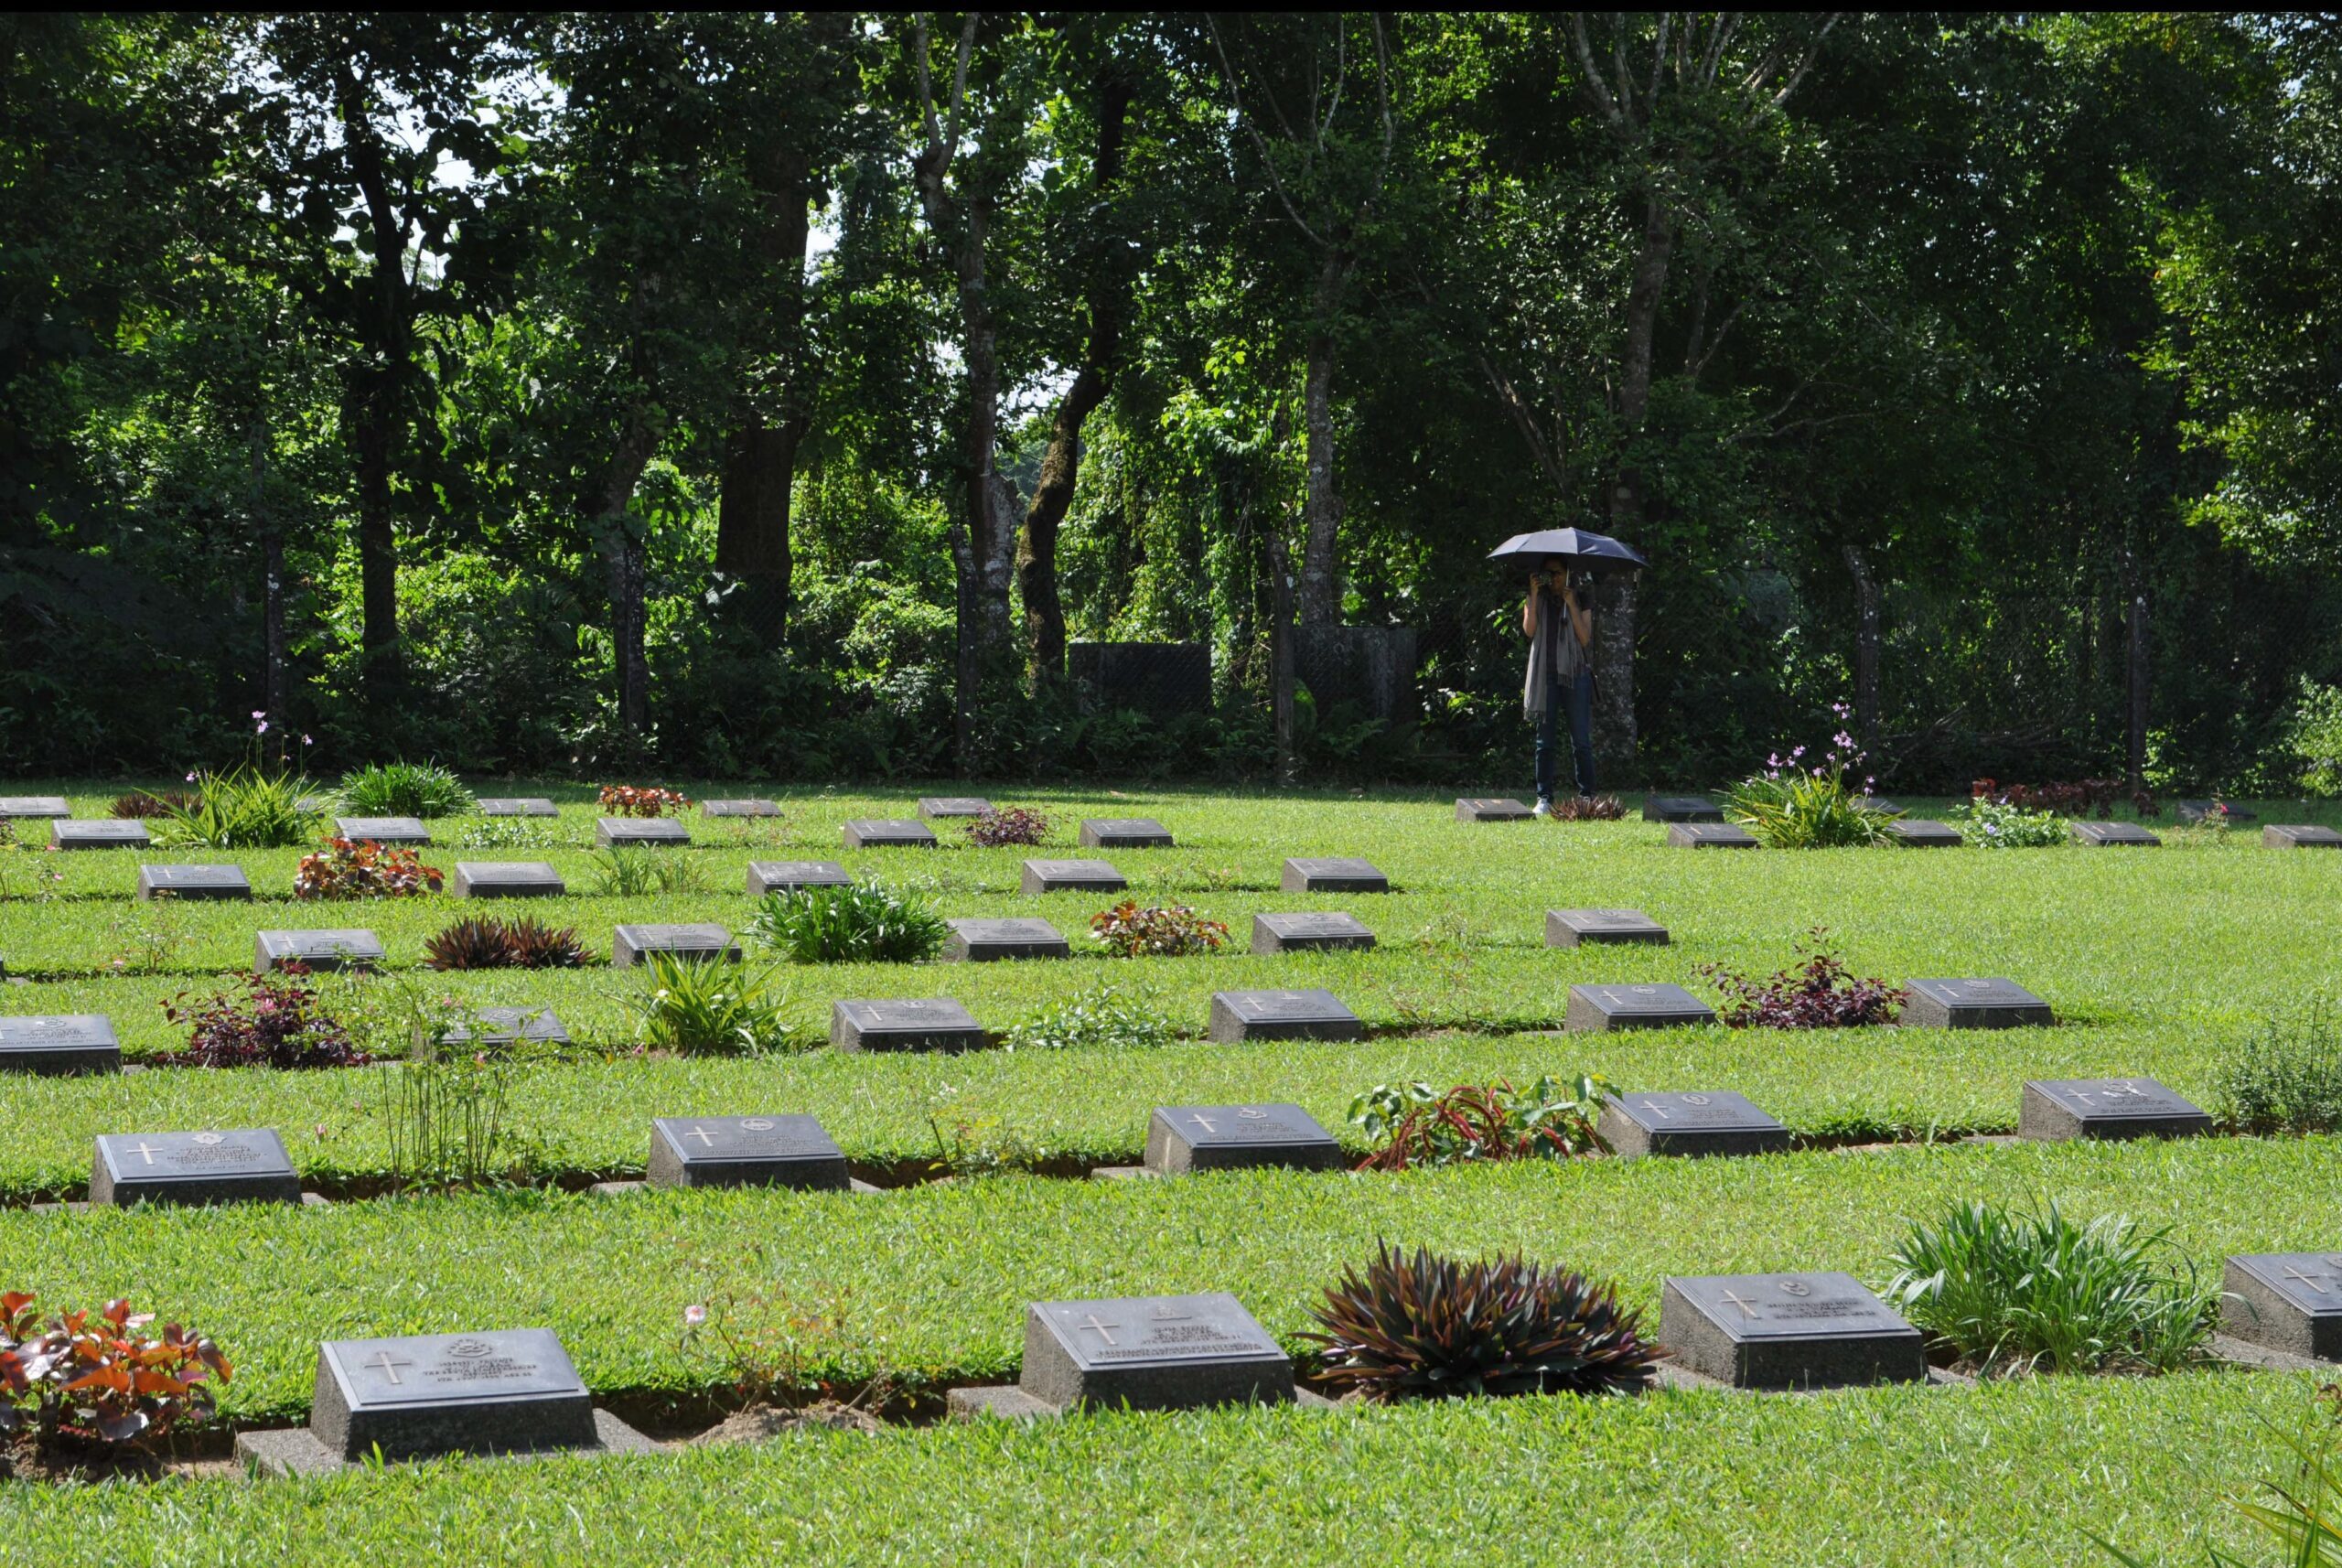 Rows of tombstones in Digboi